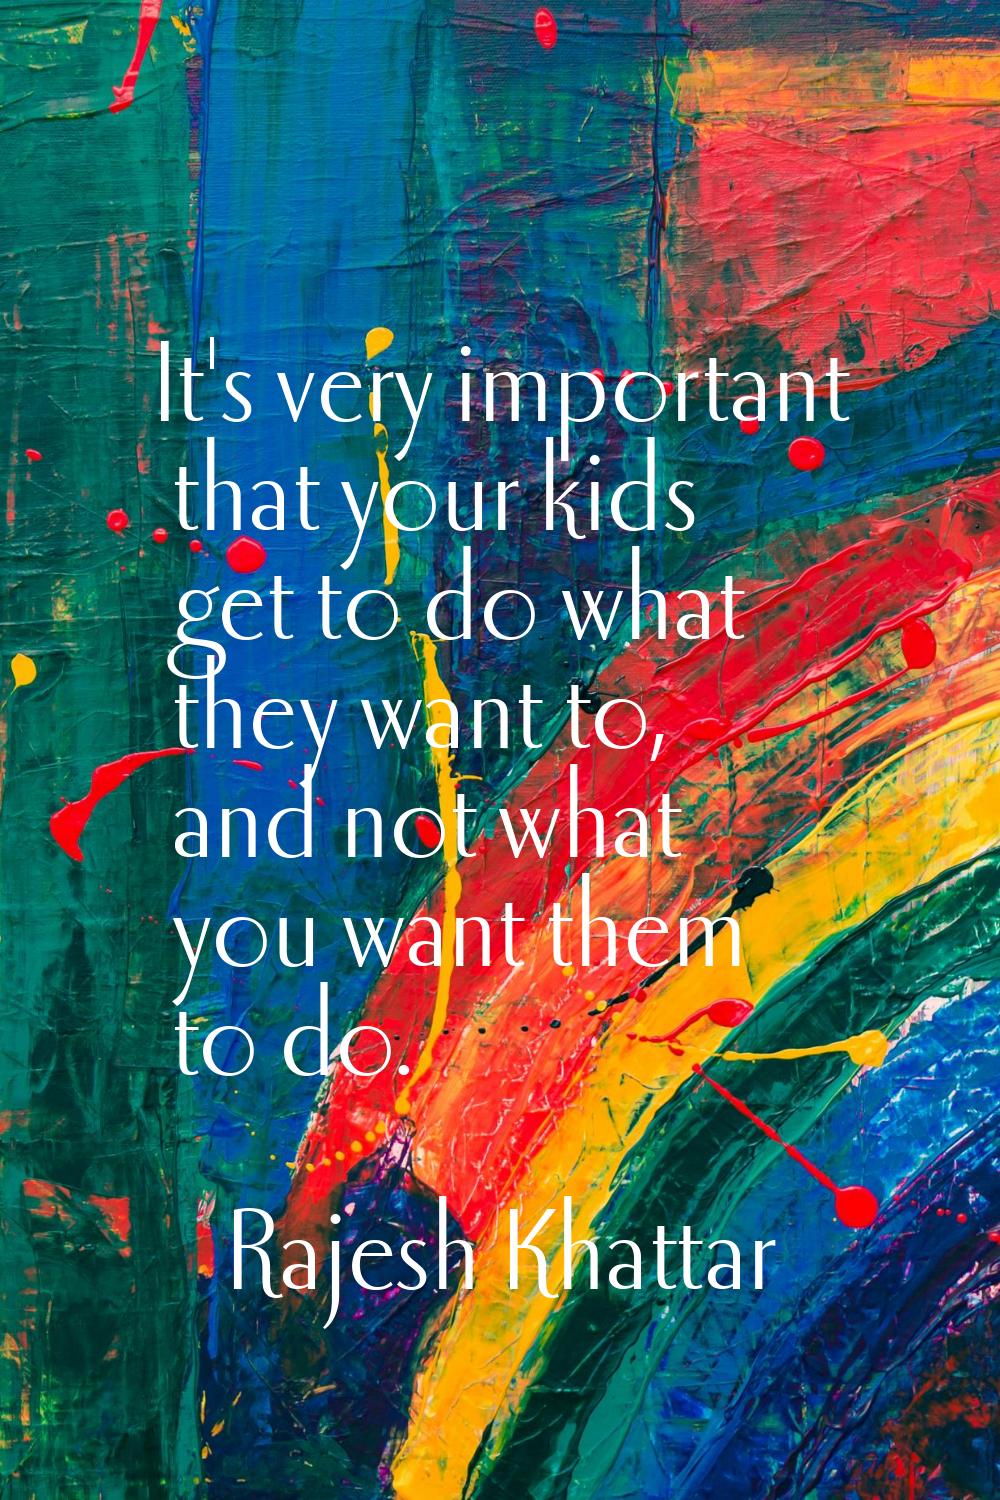 It's very important that your kids get to do what they want to, and not what you want them to do.